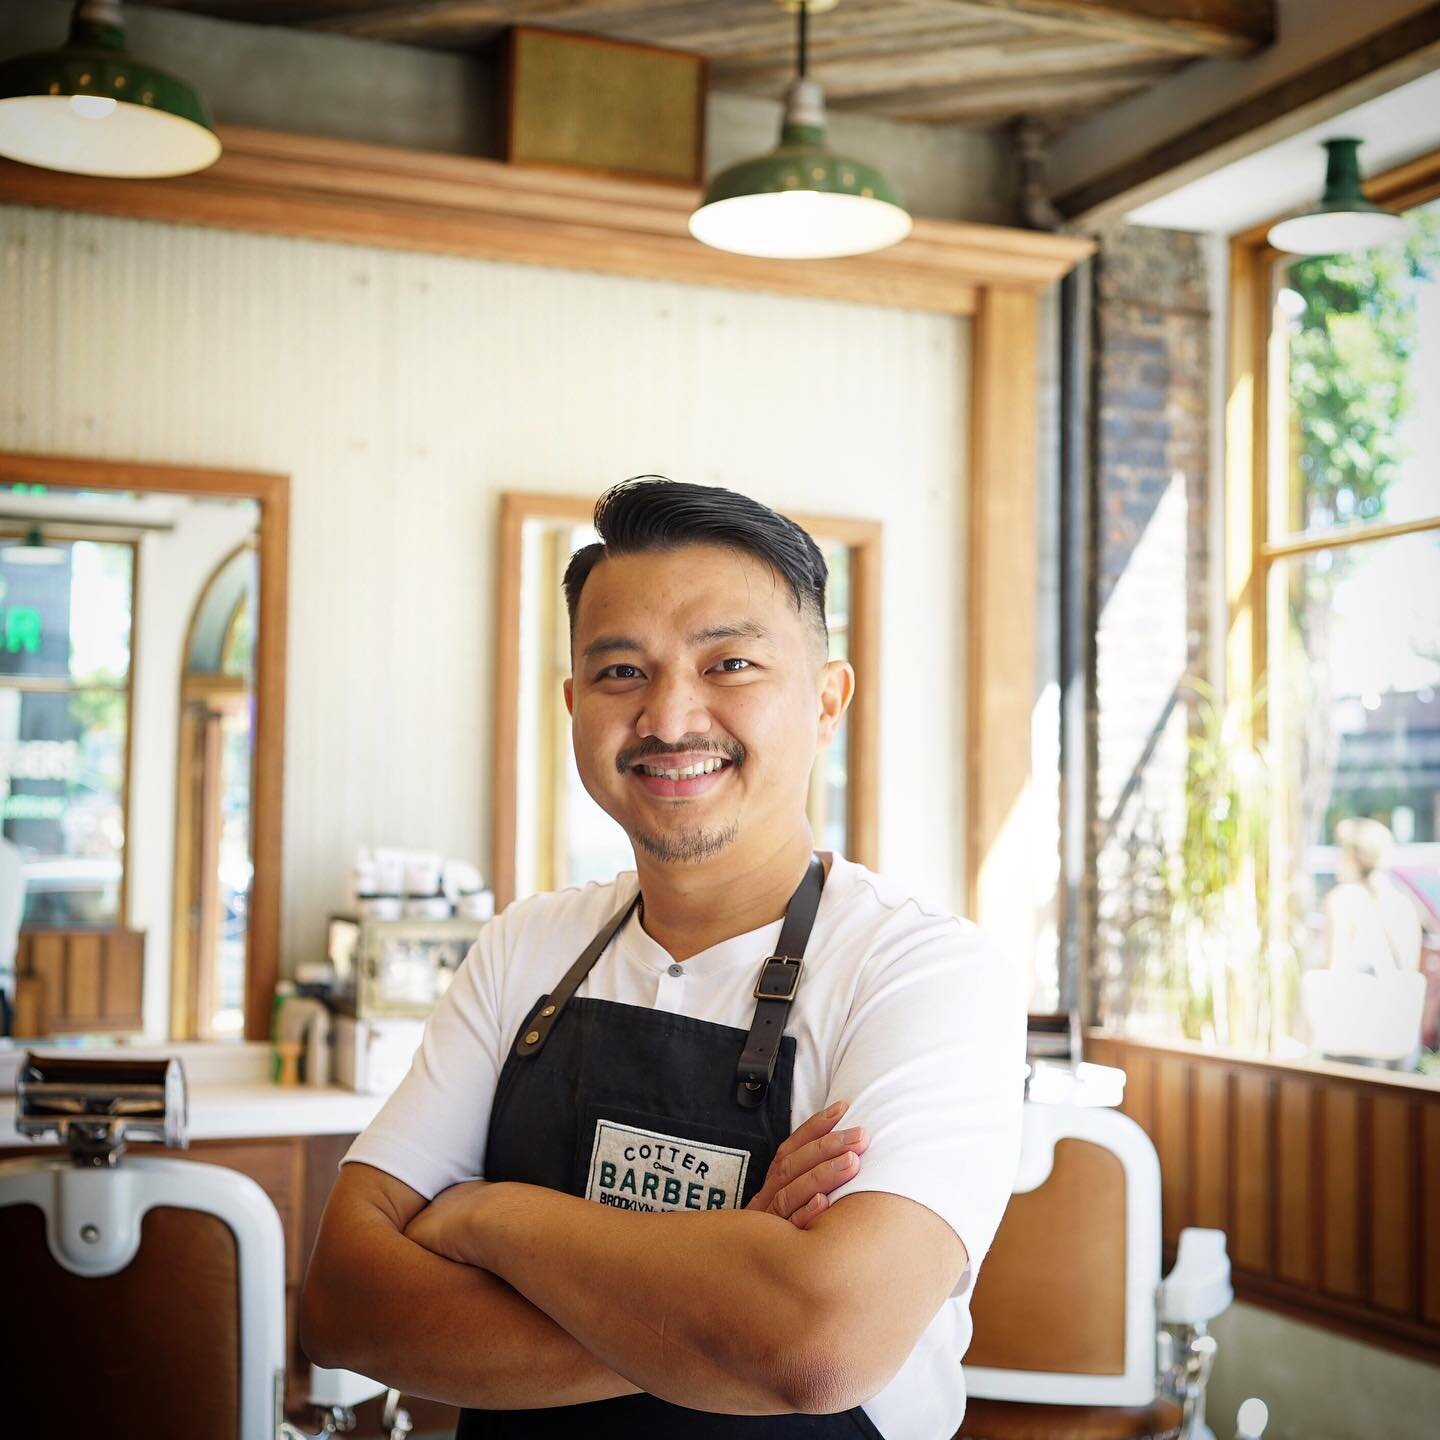 ... ✂️
Building a barber shop is one thing... Finding staff that believe in what you&rsquo;re doing is a completely different challenge within itself. 
Having spent over 10 years behind an espresso machine while honing his hair cutting skills on the 